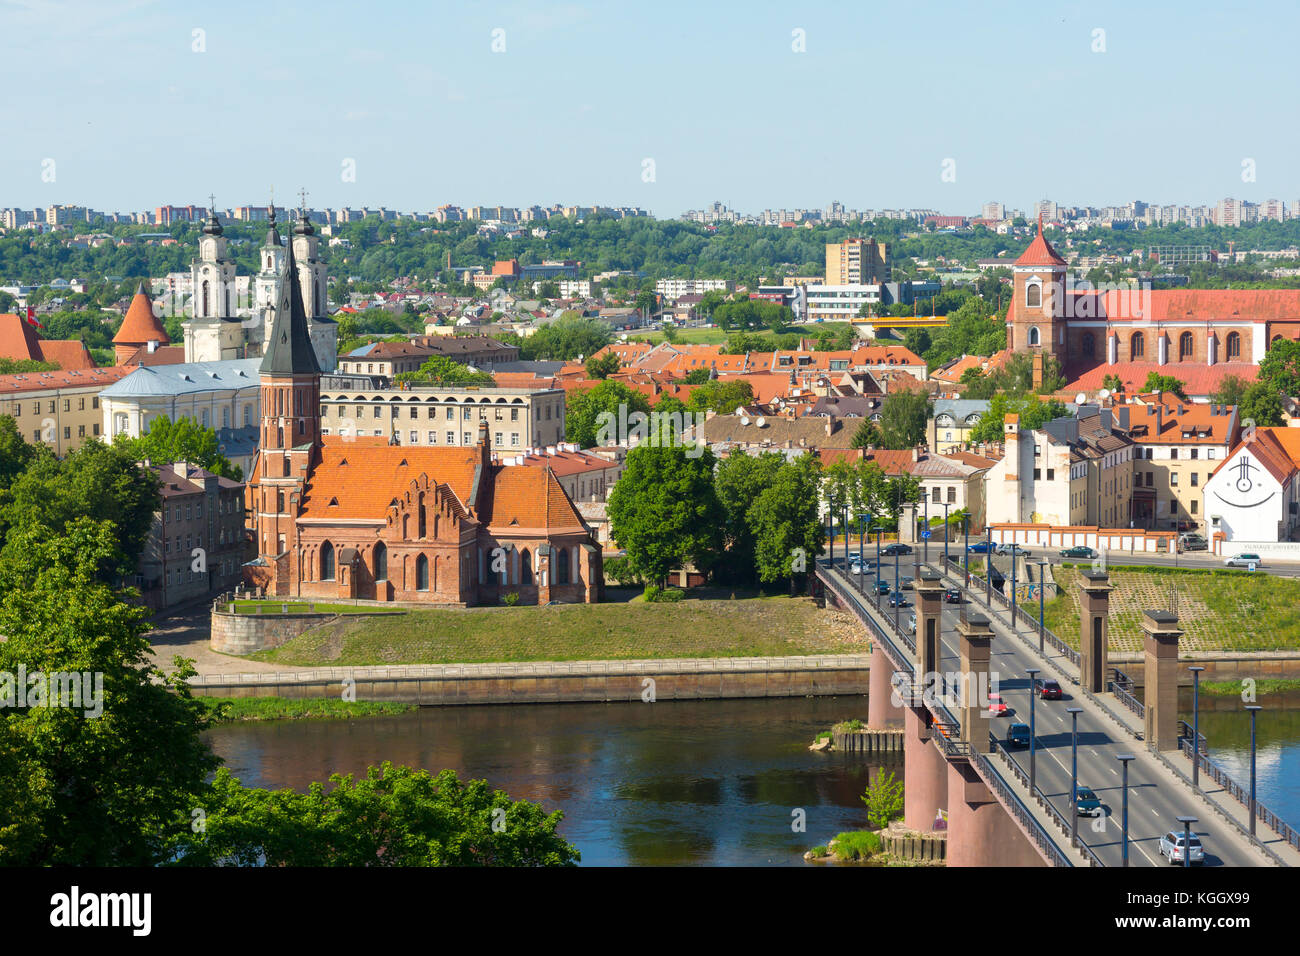 Kaunas old town day time landscape Stock Photo